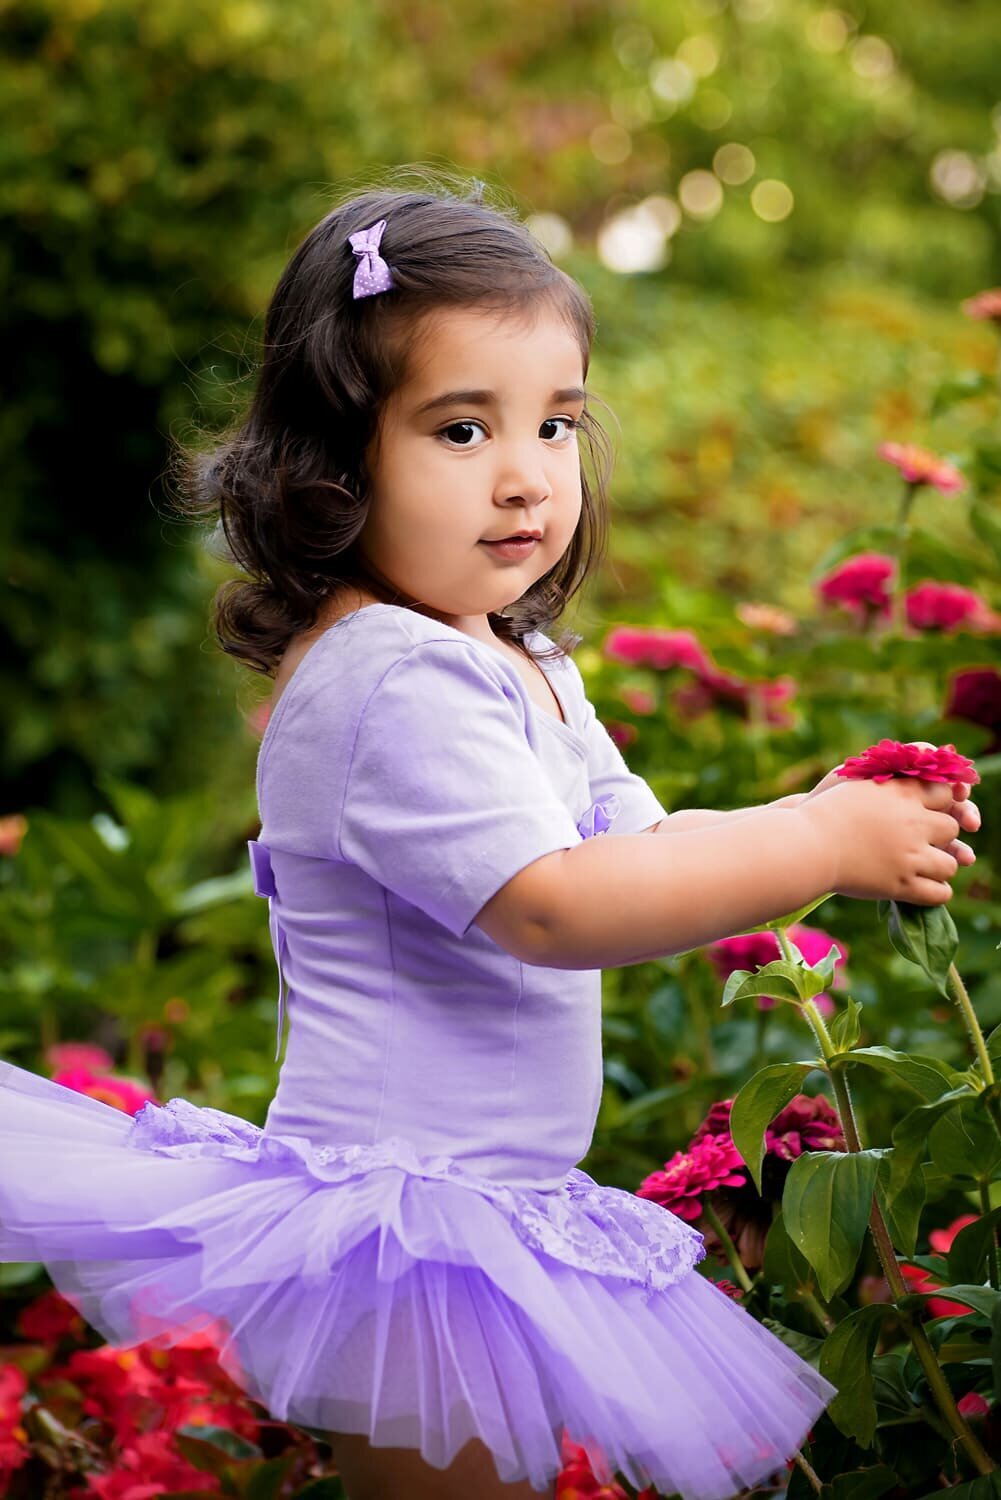 Outdoor child portrait of 2 year old girl in purple tutu playing in flowers at Deer Lake Park